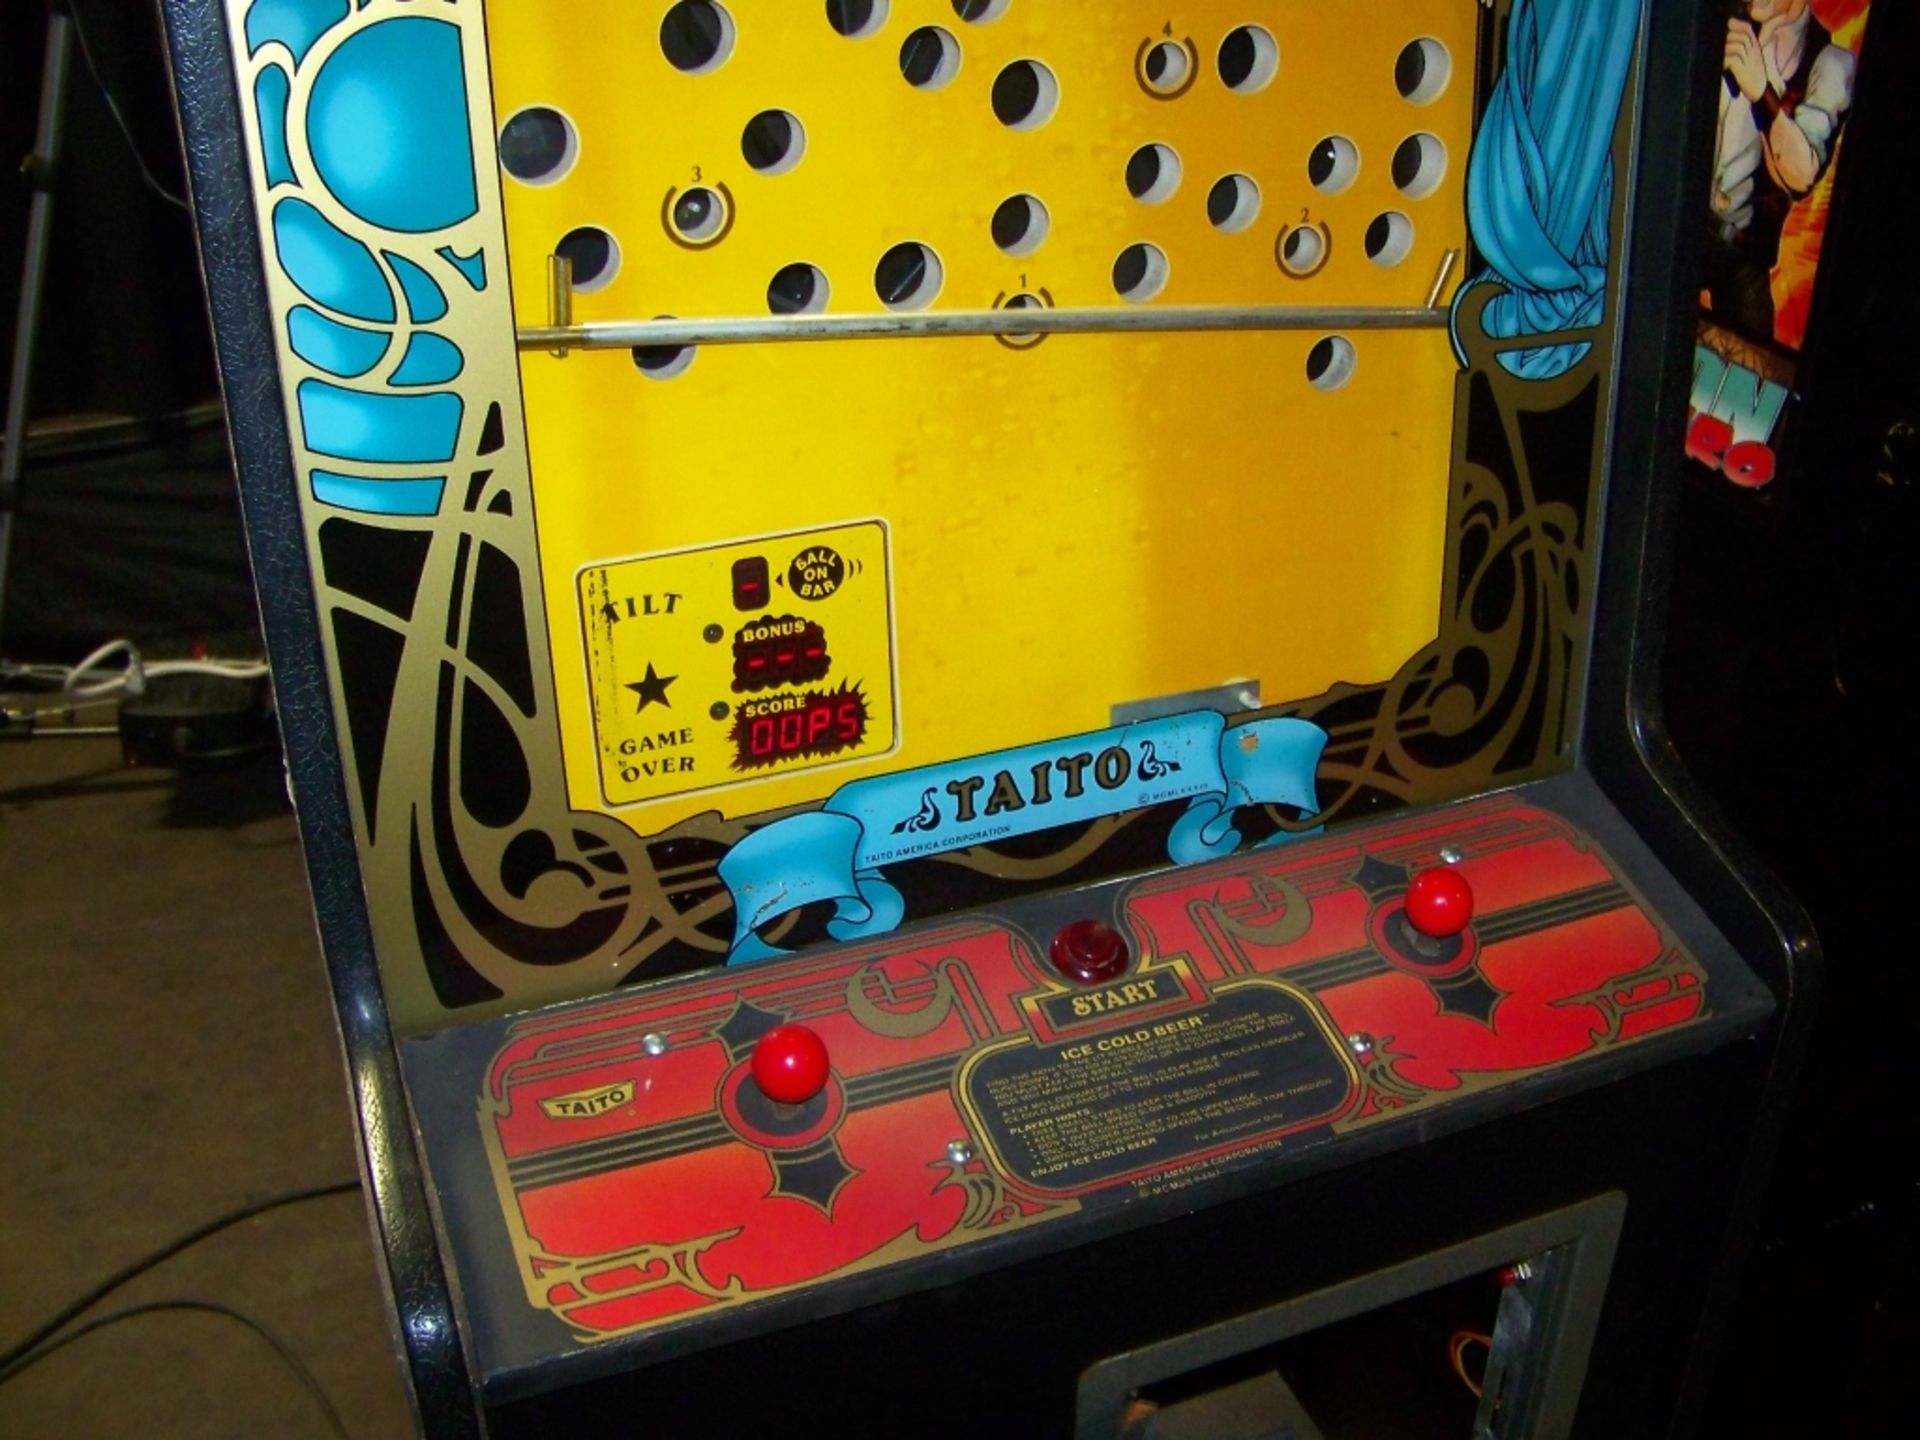 ICE COLD BEER ARCADE GAME TAITO CLASSIC - Image 3 of 7